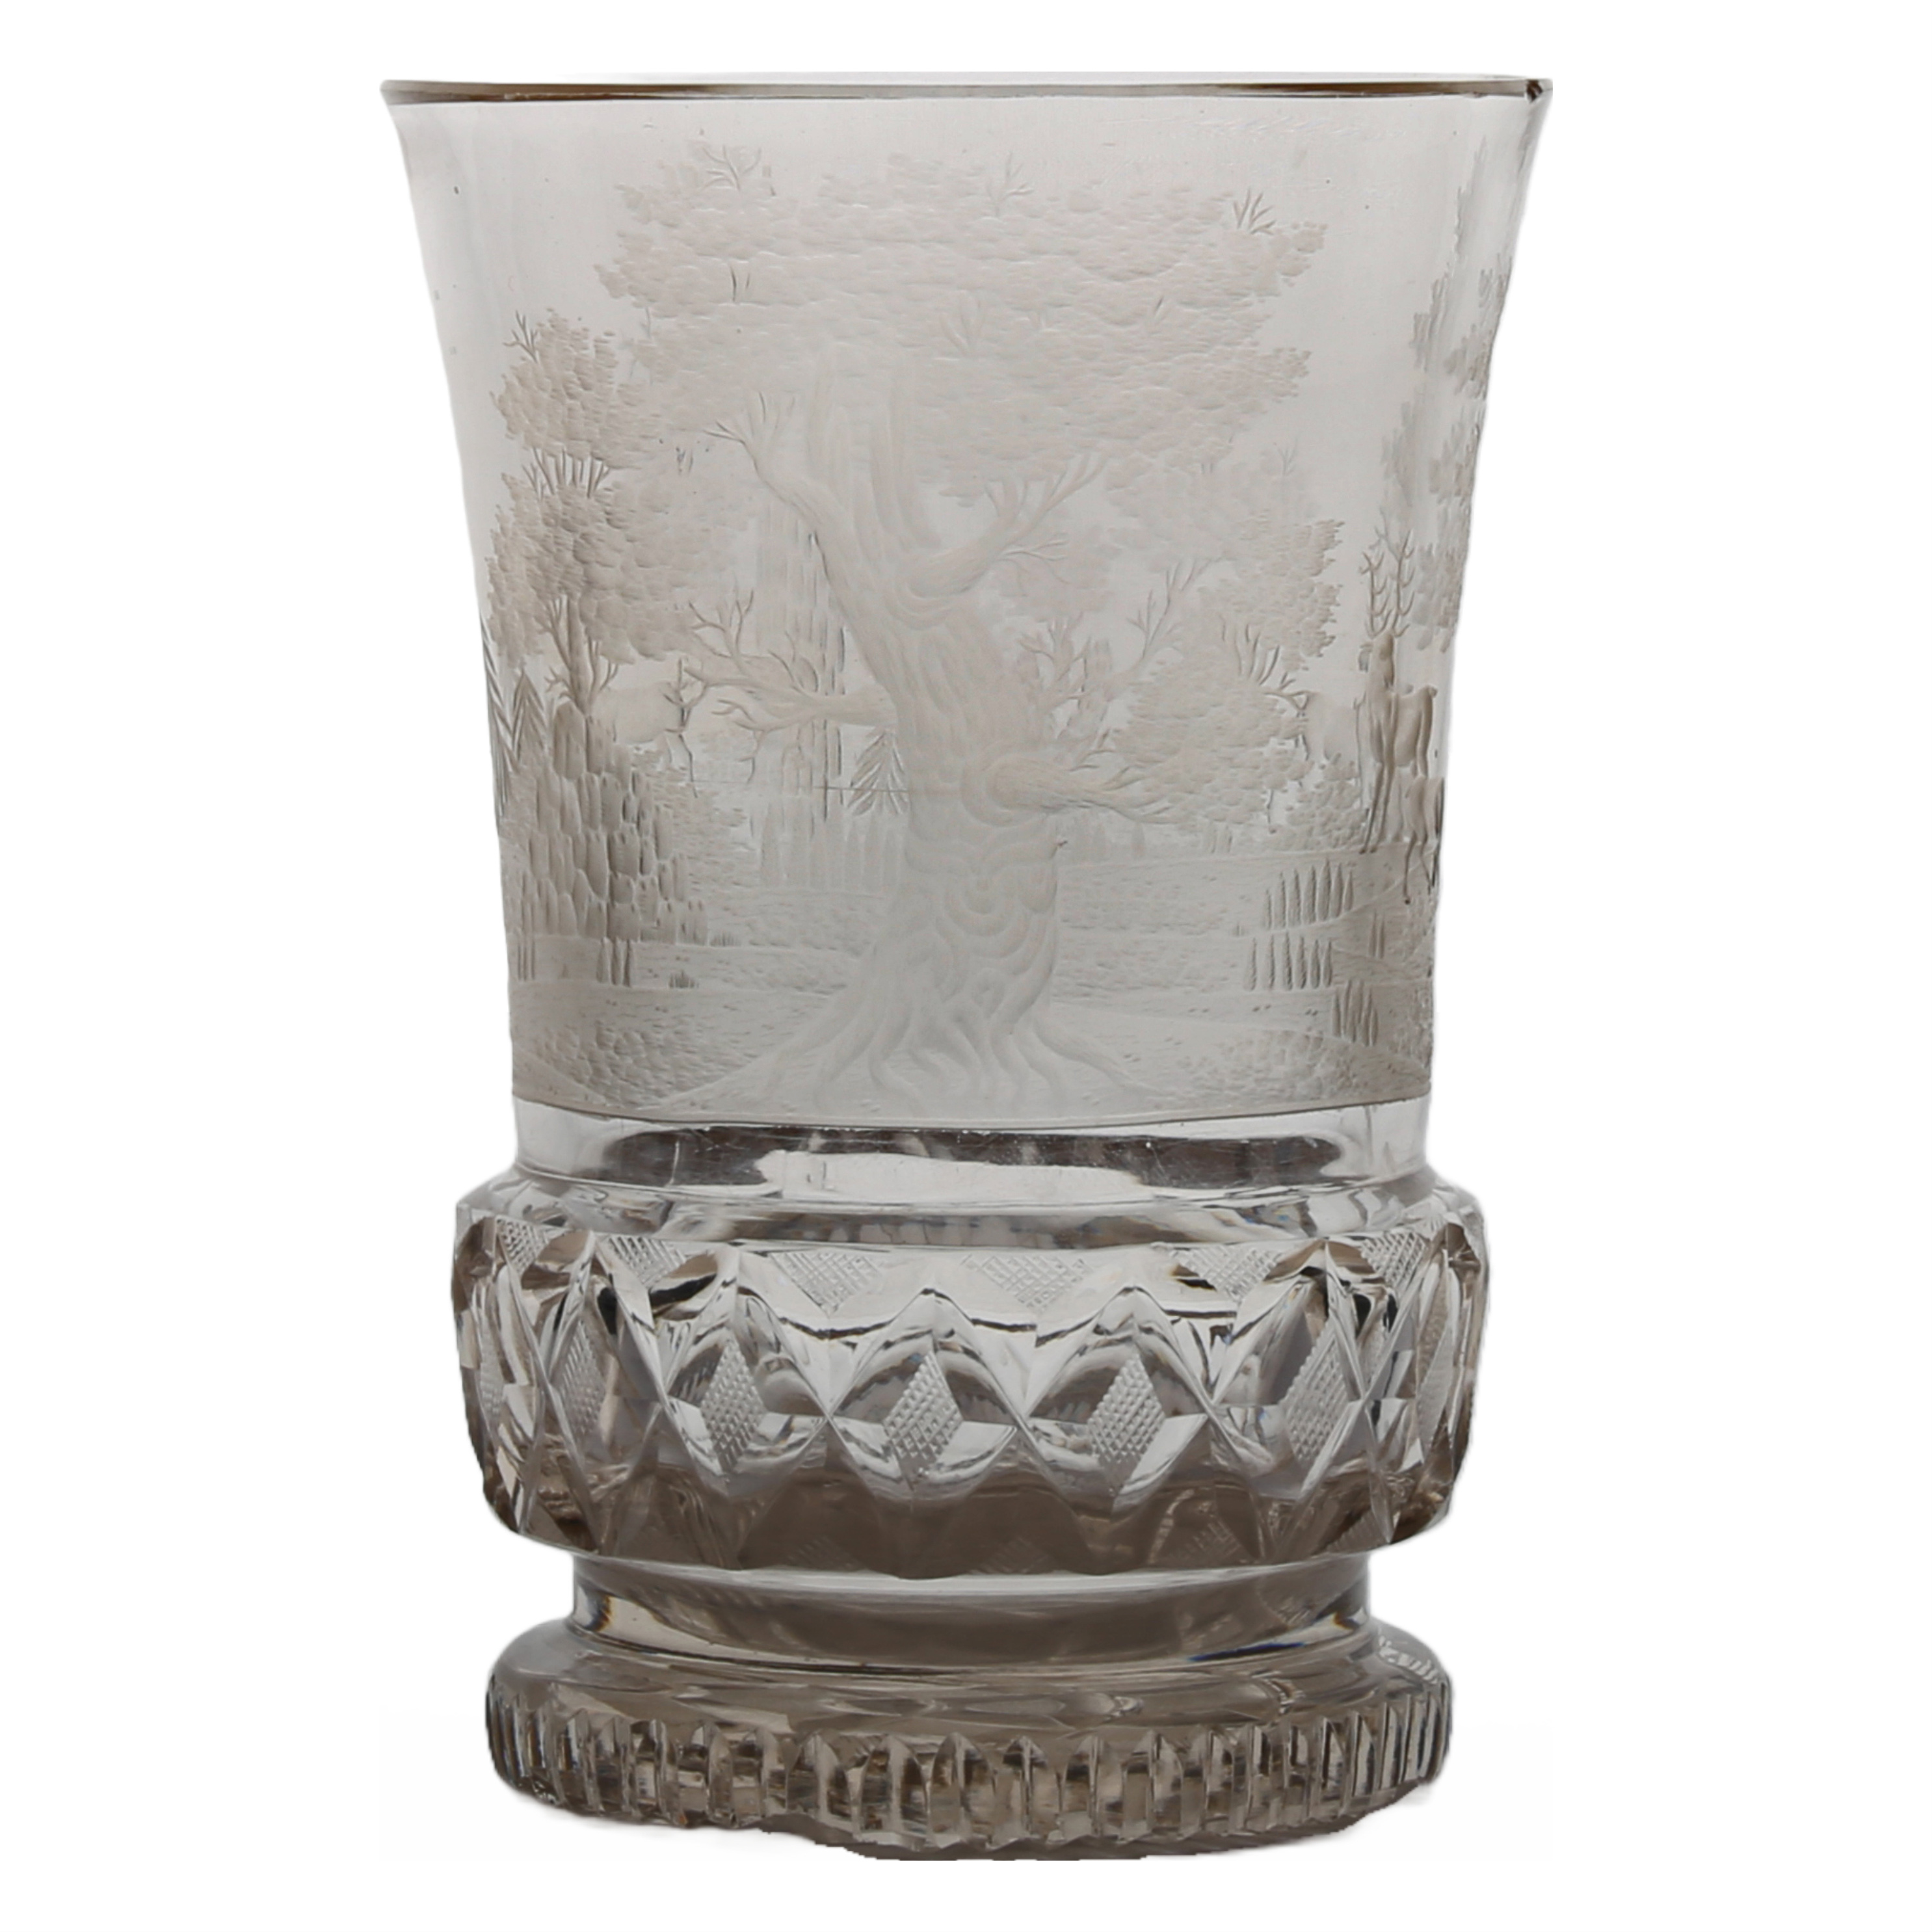 An early 20th Century finely engraved beaker, with a forest scene and stags, probably produced in - Image 2 of 3